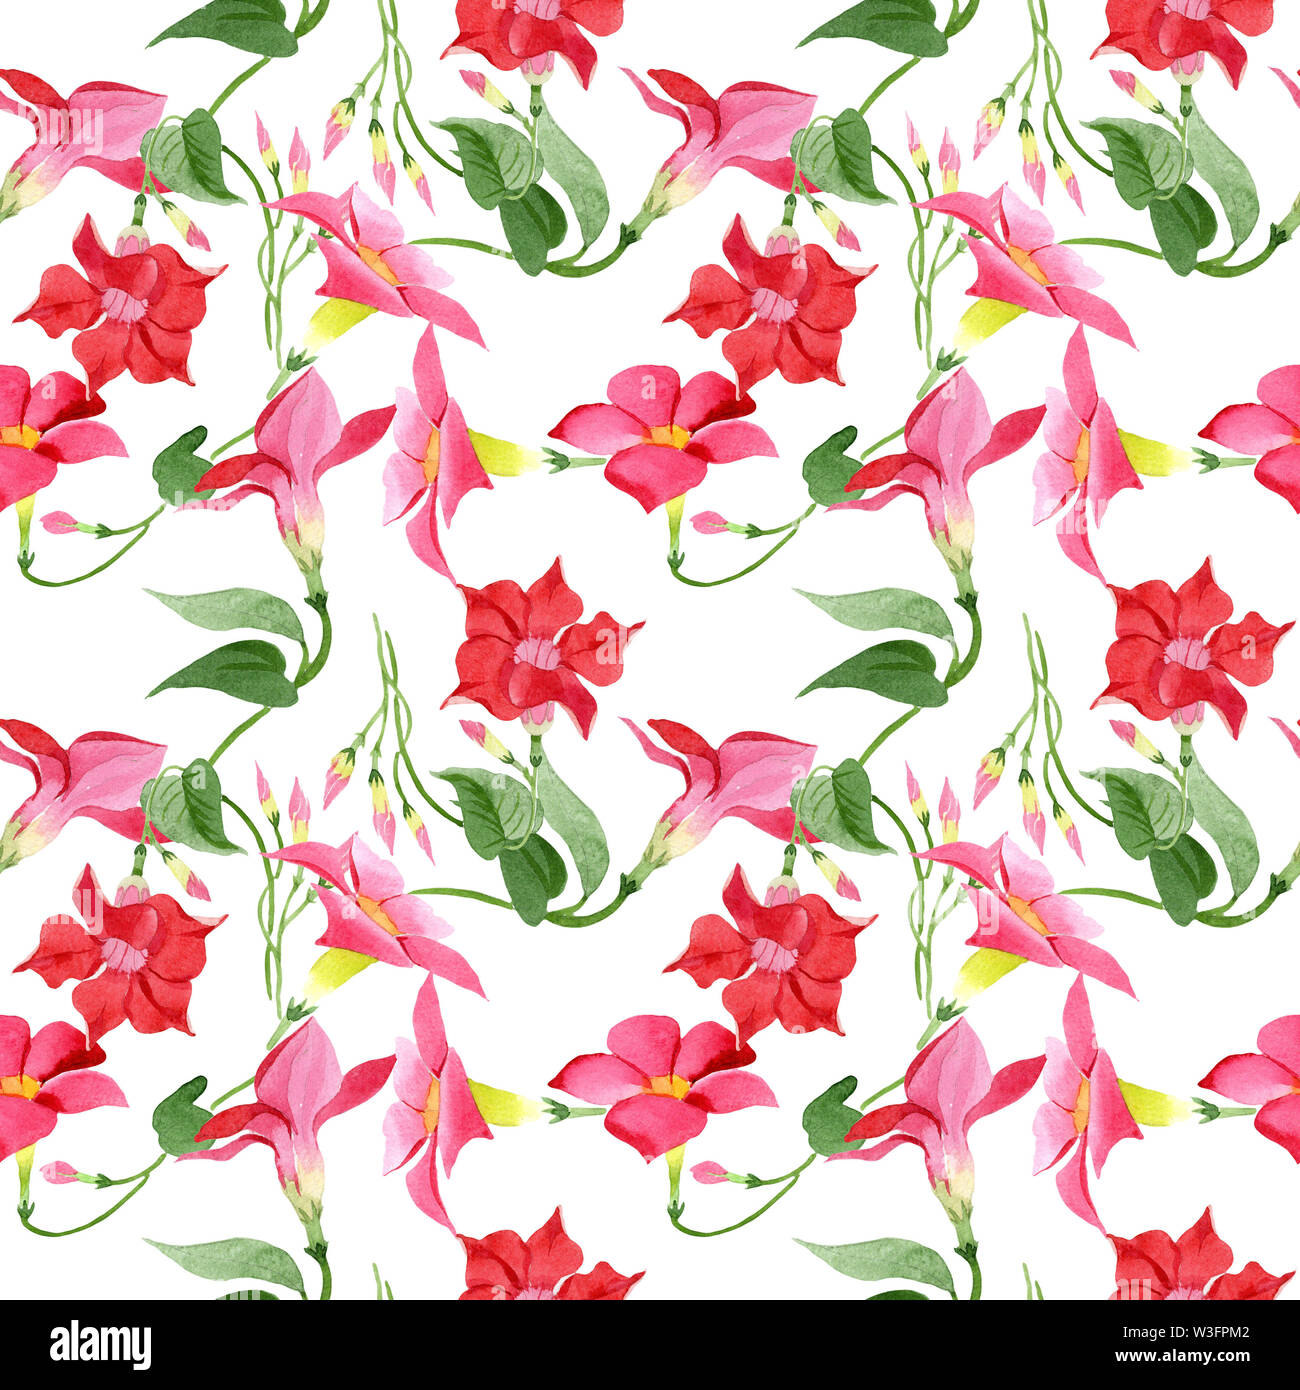 Red dipladenia floral botanical flowers. Watercolor background illustration set. Seamless background pattern. Stock Photo